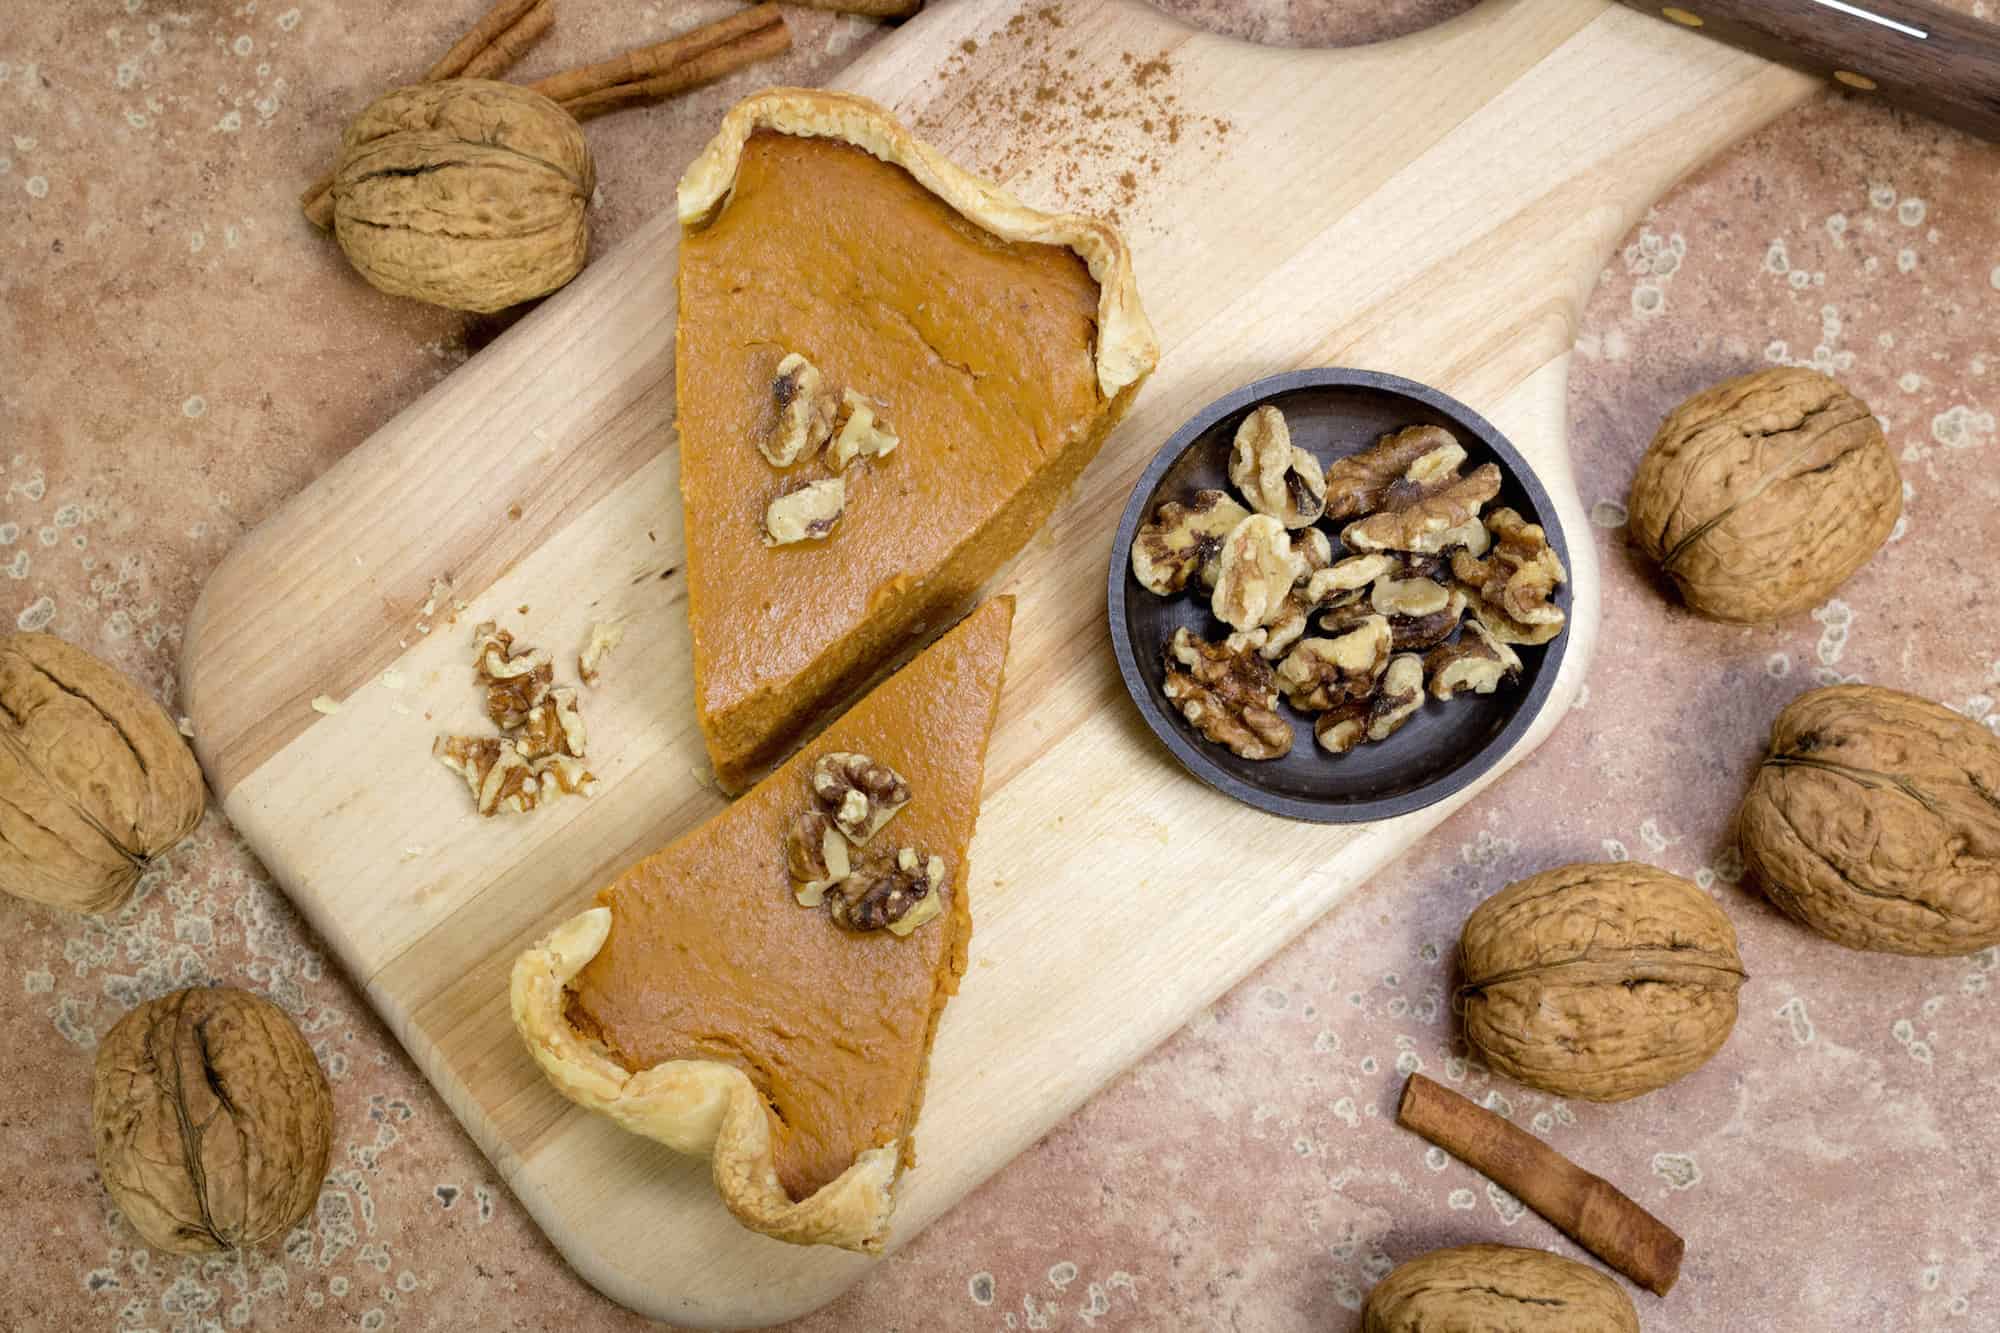 Two slices of yellow pumpking pie sits on a wooden board with a small bowl of walnuts.